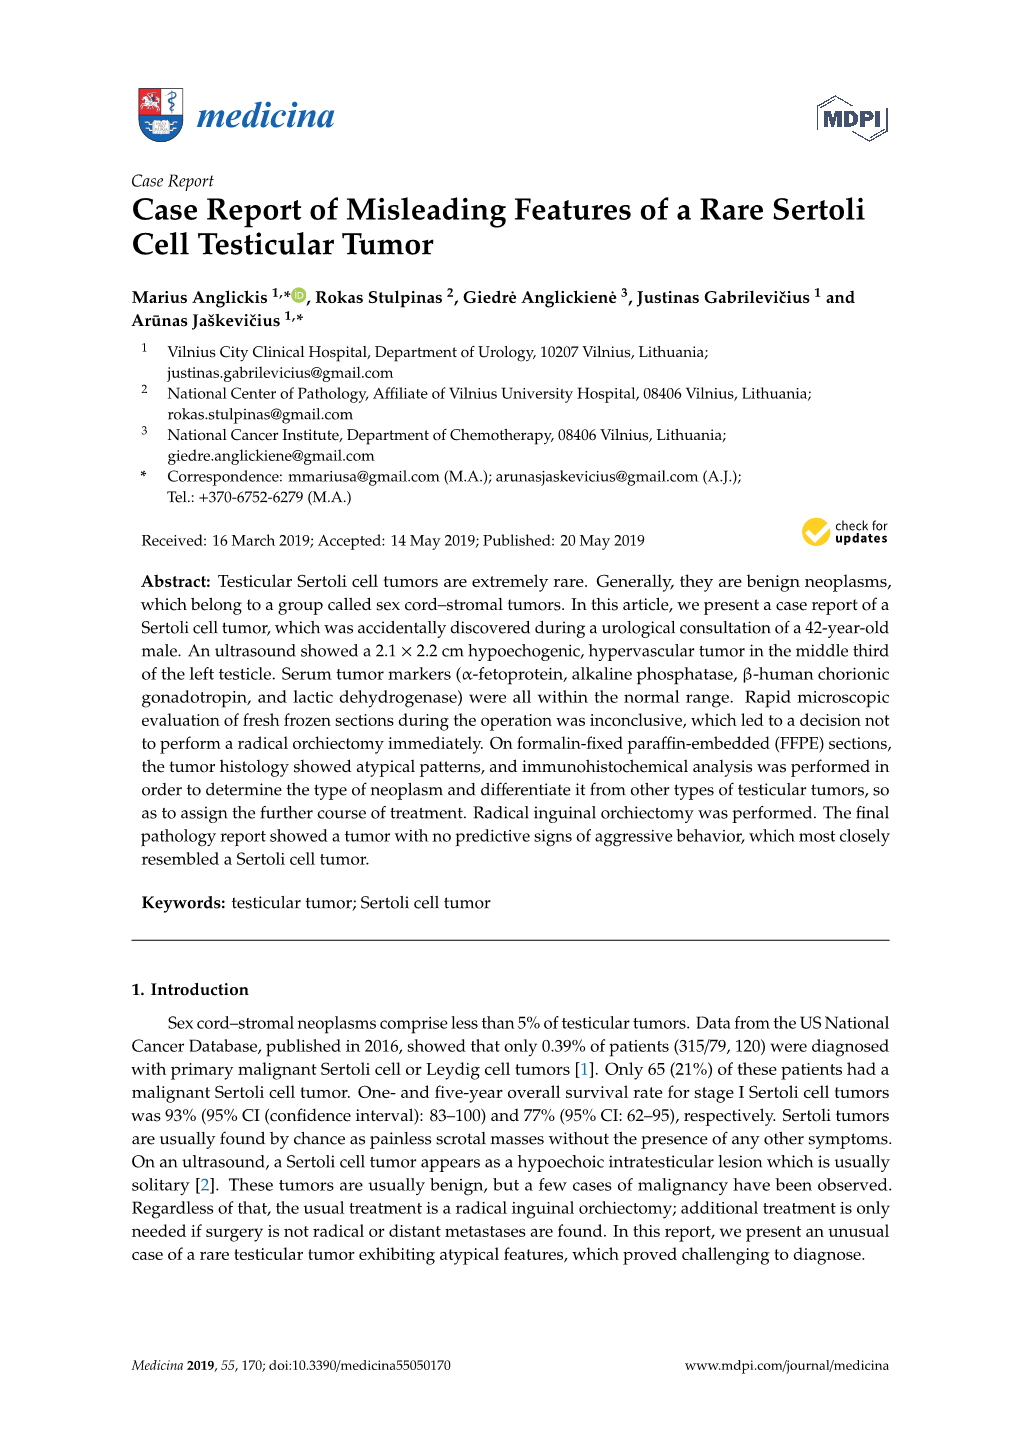 Case Report of Misleading Features of a Rare Sertoli Cell Testicular Tumor